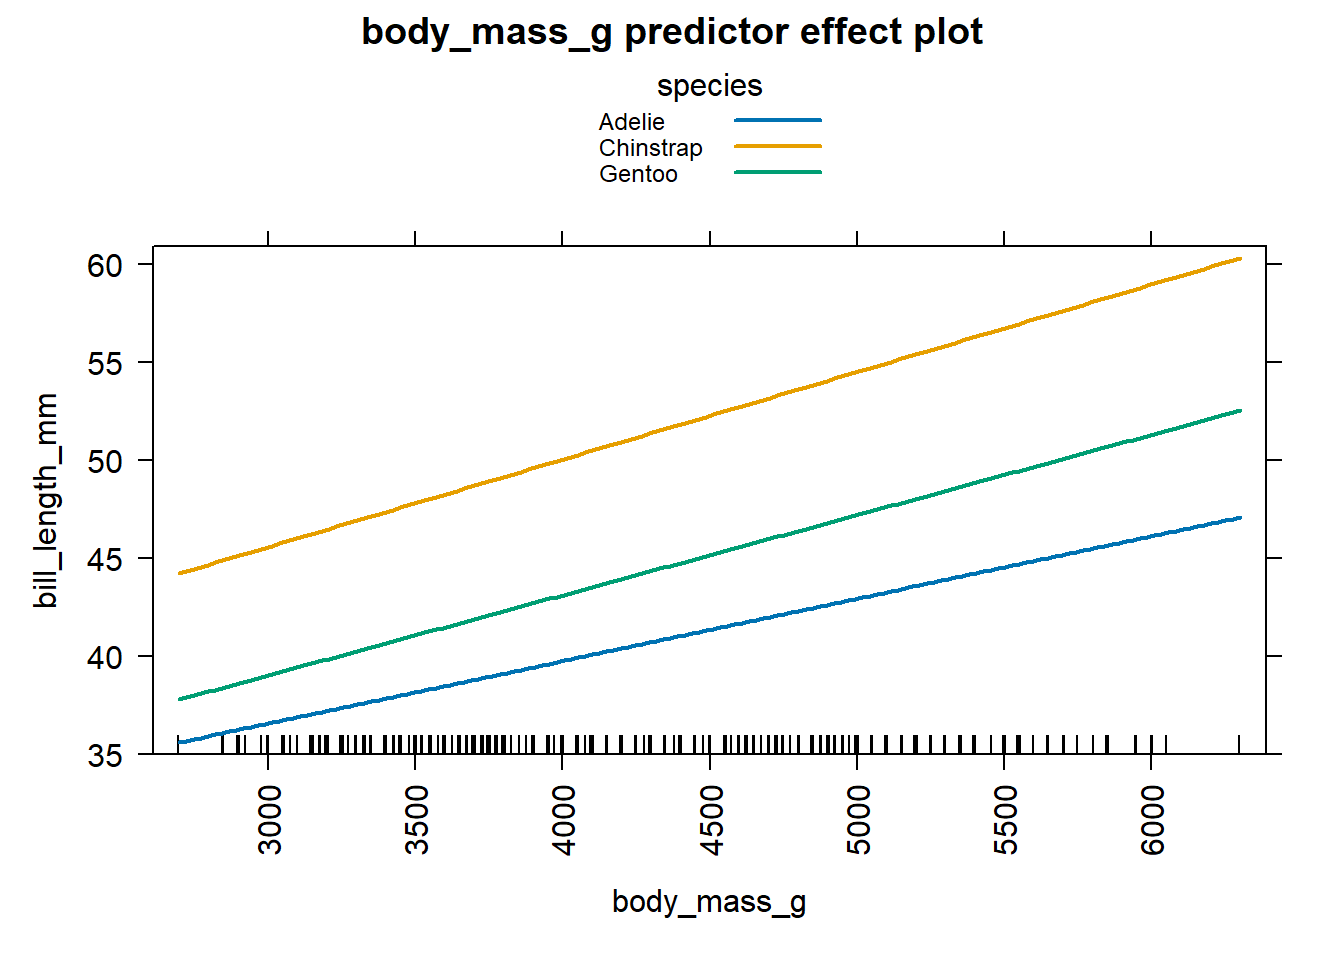 Effect plot for body mass based on the equations in Equation \@ref(eq:separate-lines-equations-effects-plot).